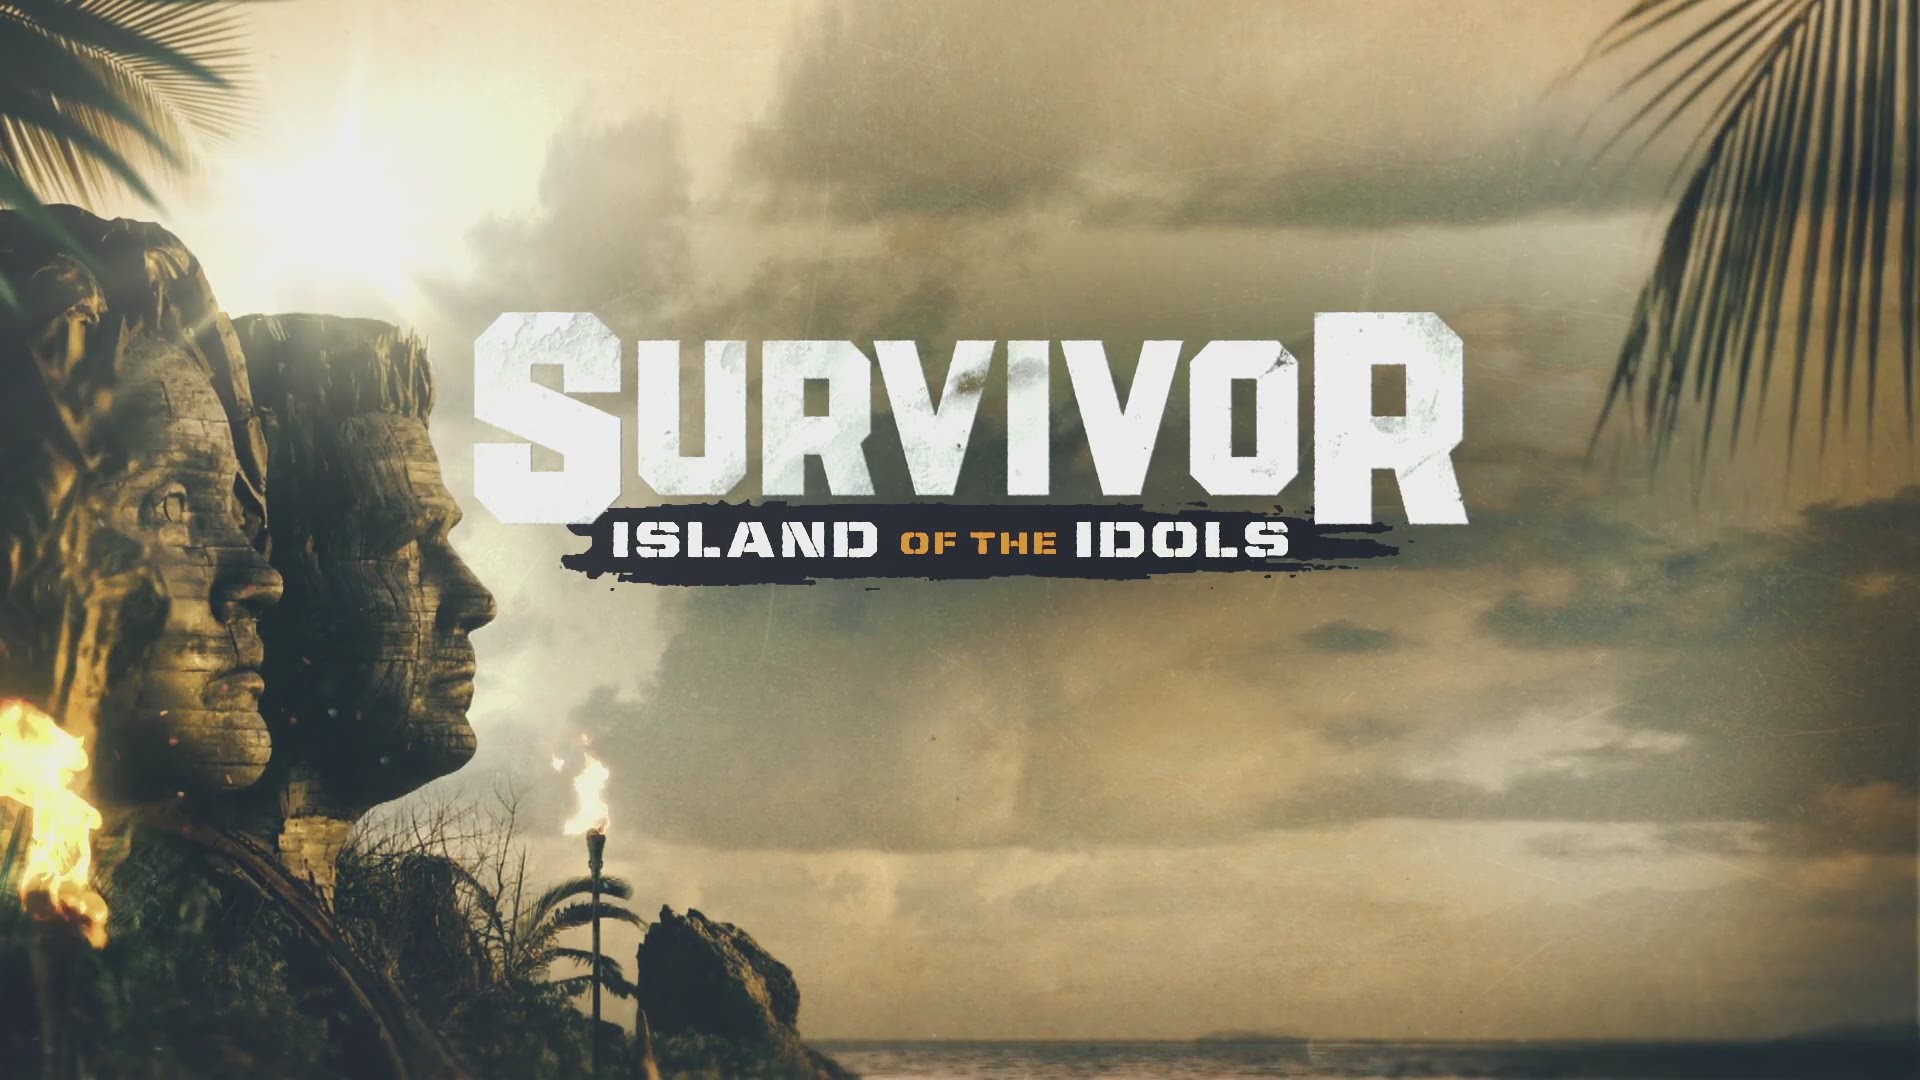 The Emmy Award-winning reality series SURVIVOR is back with a couple of familiar faces this Fall. For its 39th edition themed “Island of the Idols, legends of the game, Boston Rob Mariano and Sandra Diaz-Twine return to the game to serve as mentors to this season’s new castaways.